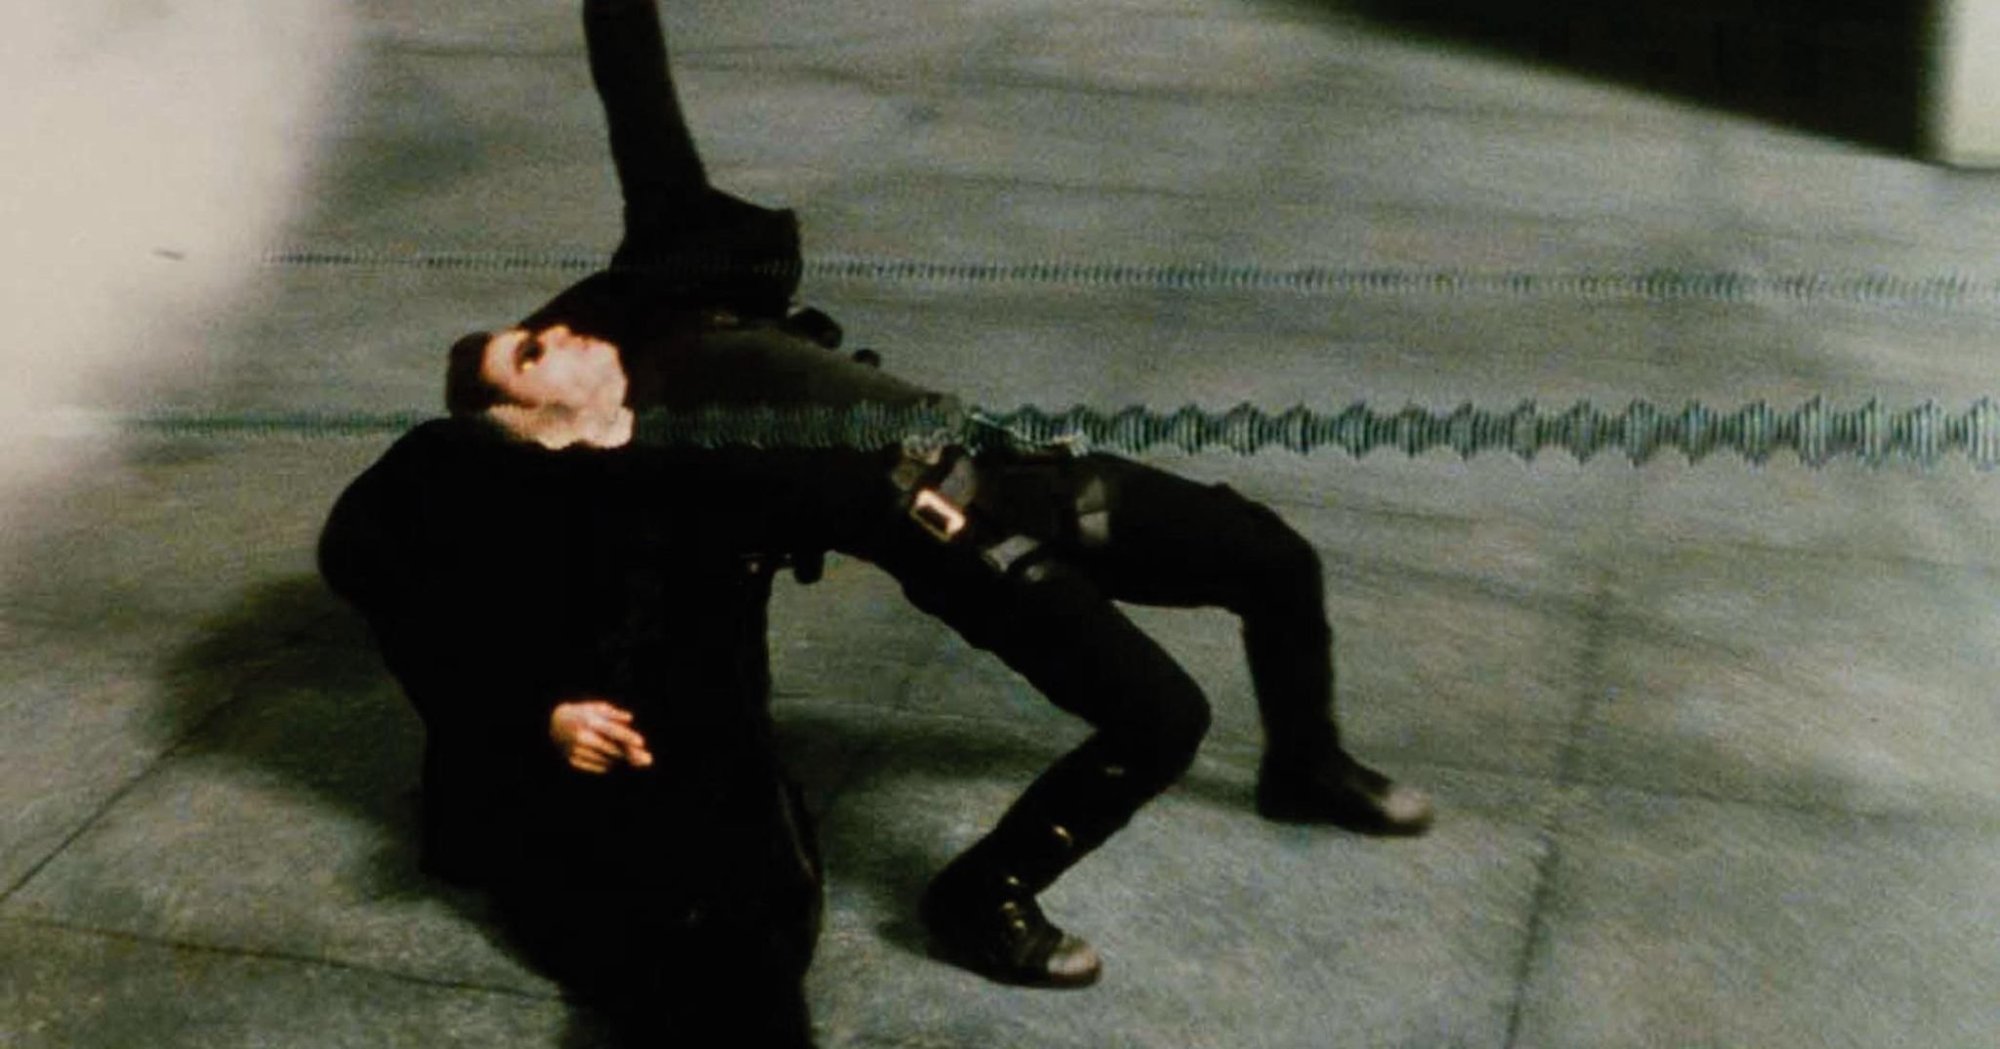 'The Matrix' Keanu Reeves as Neo dodging backward wearing all black, as bullets fly by.